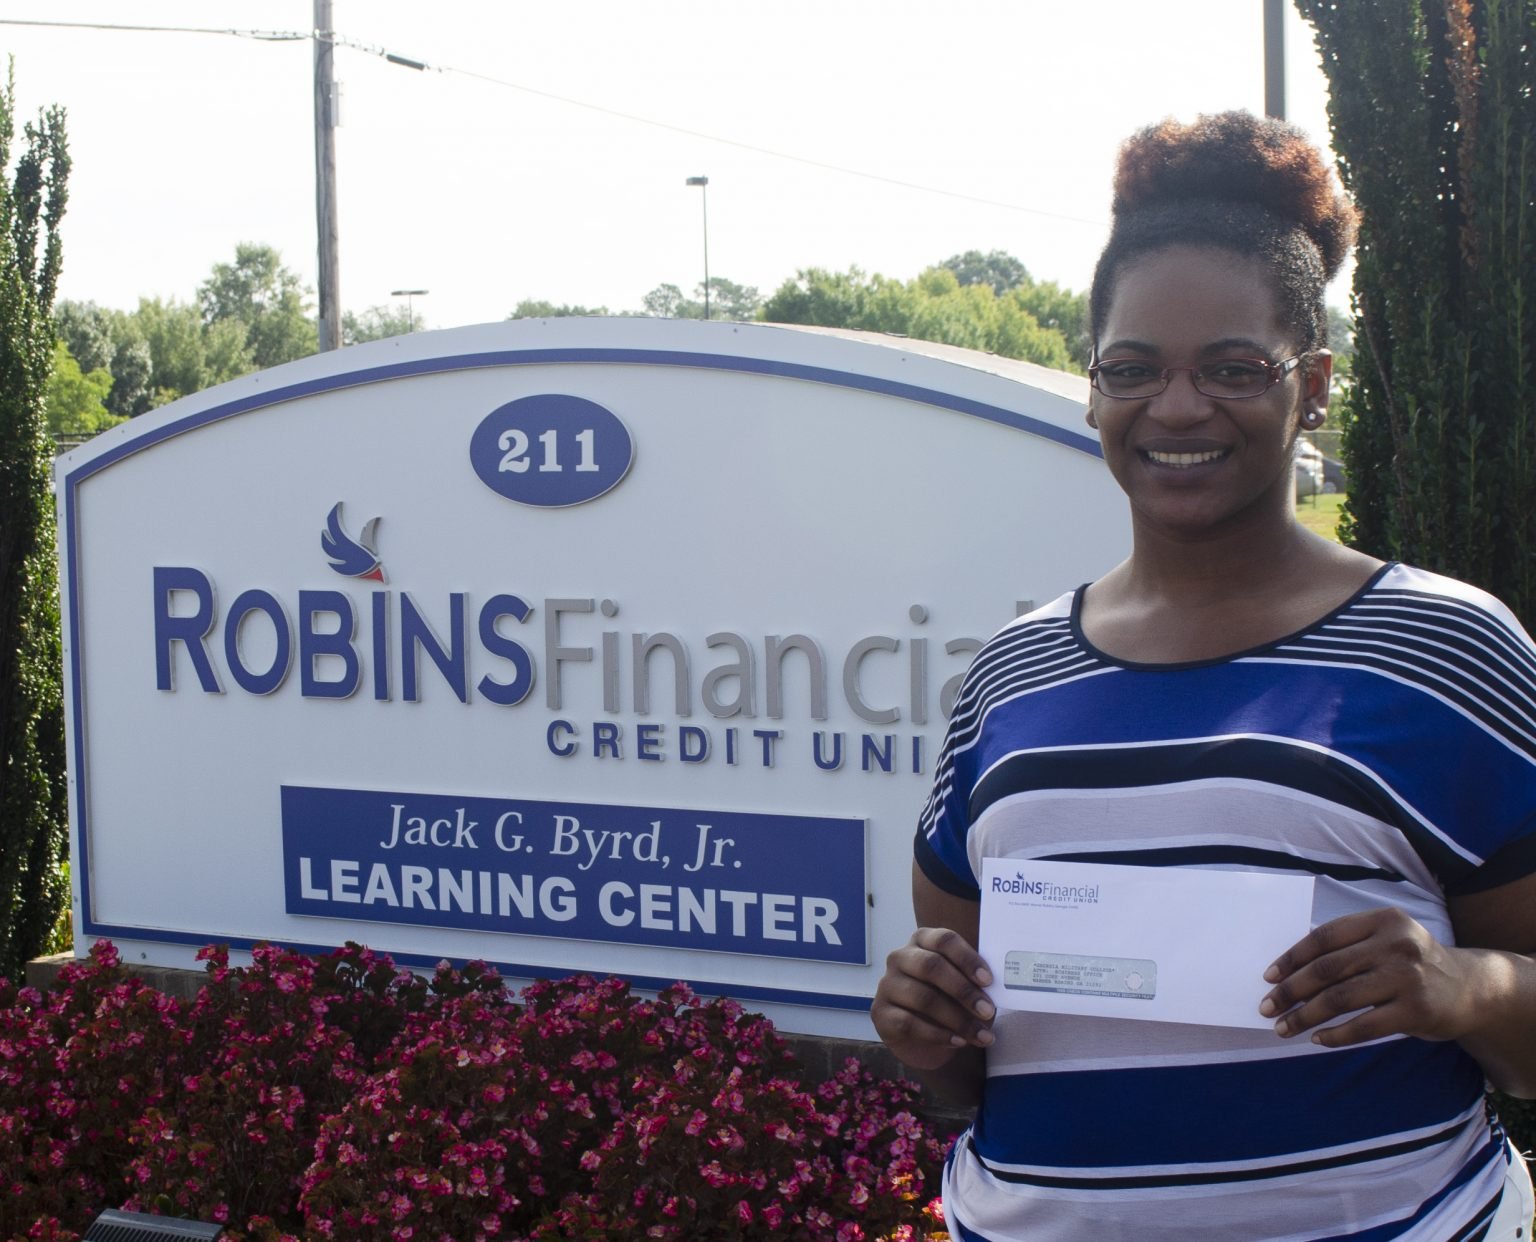 Robins Financial Credit Union provides scholarship CUInsight